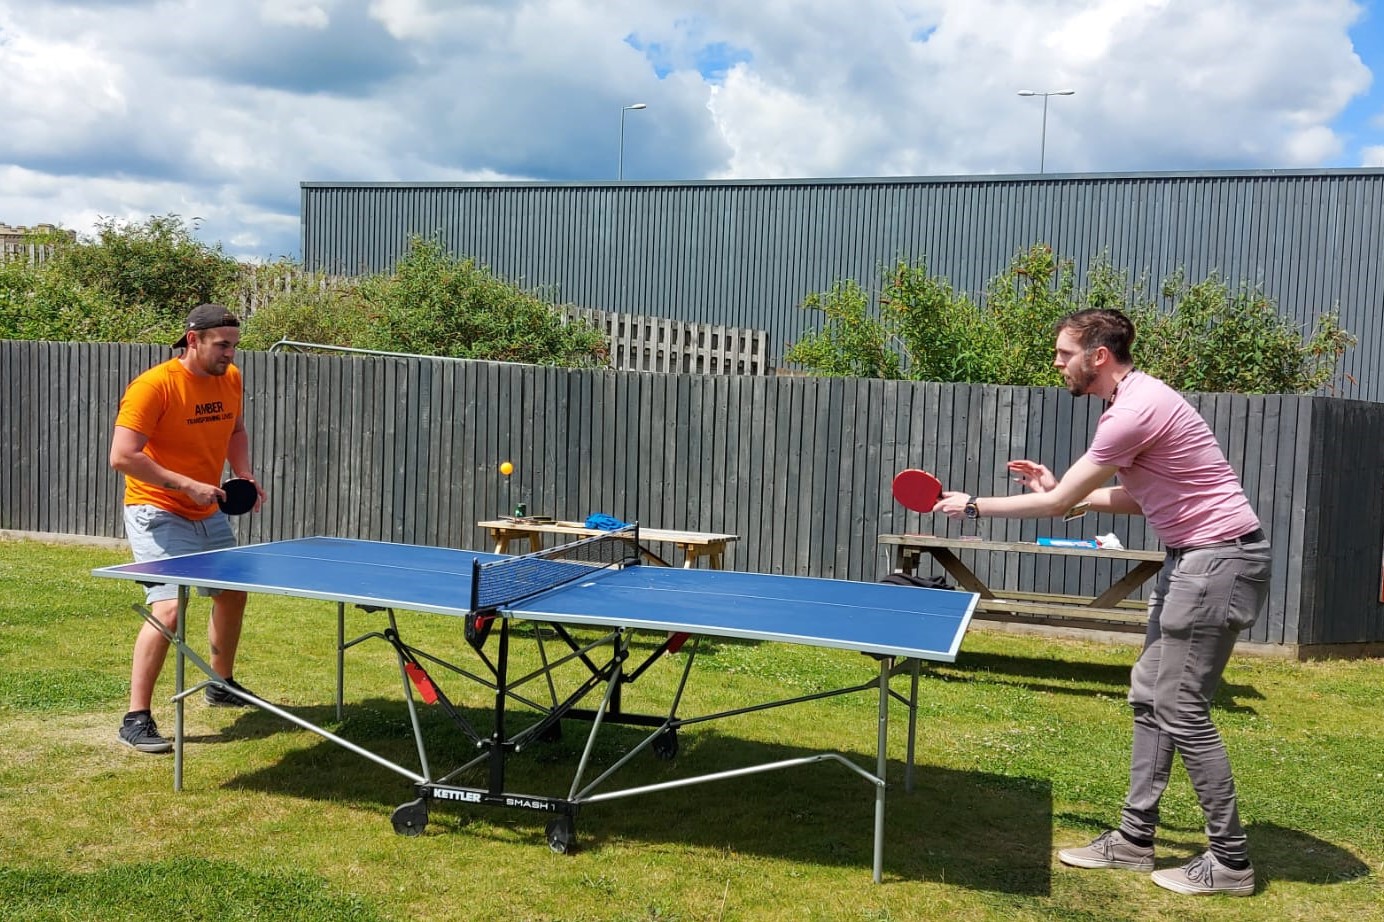 Two men playing table tennis in the sunshine